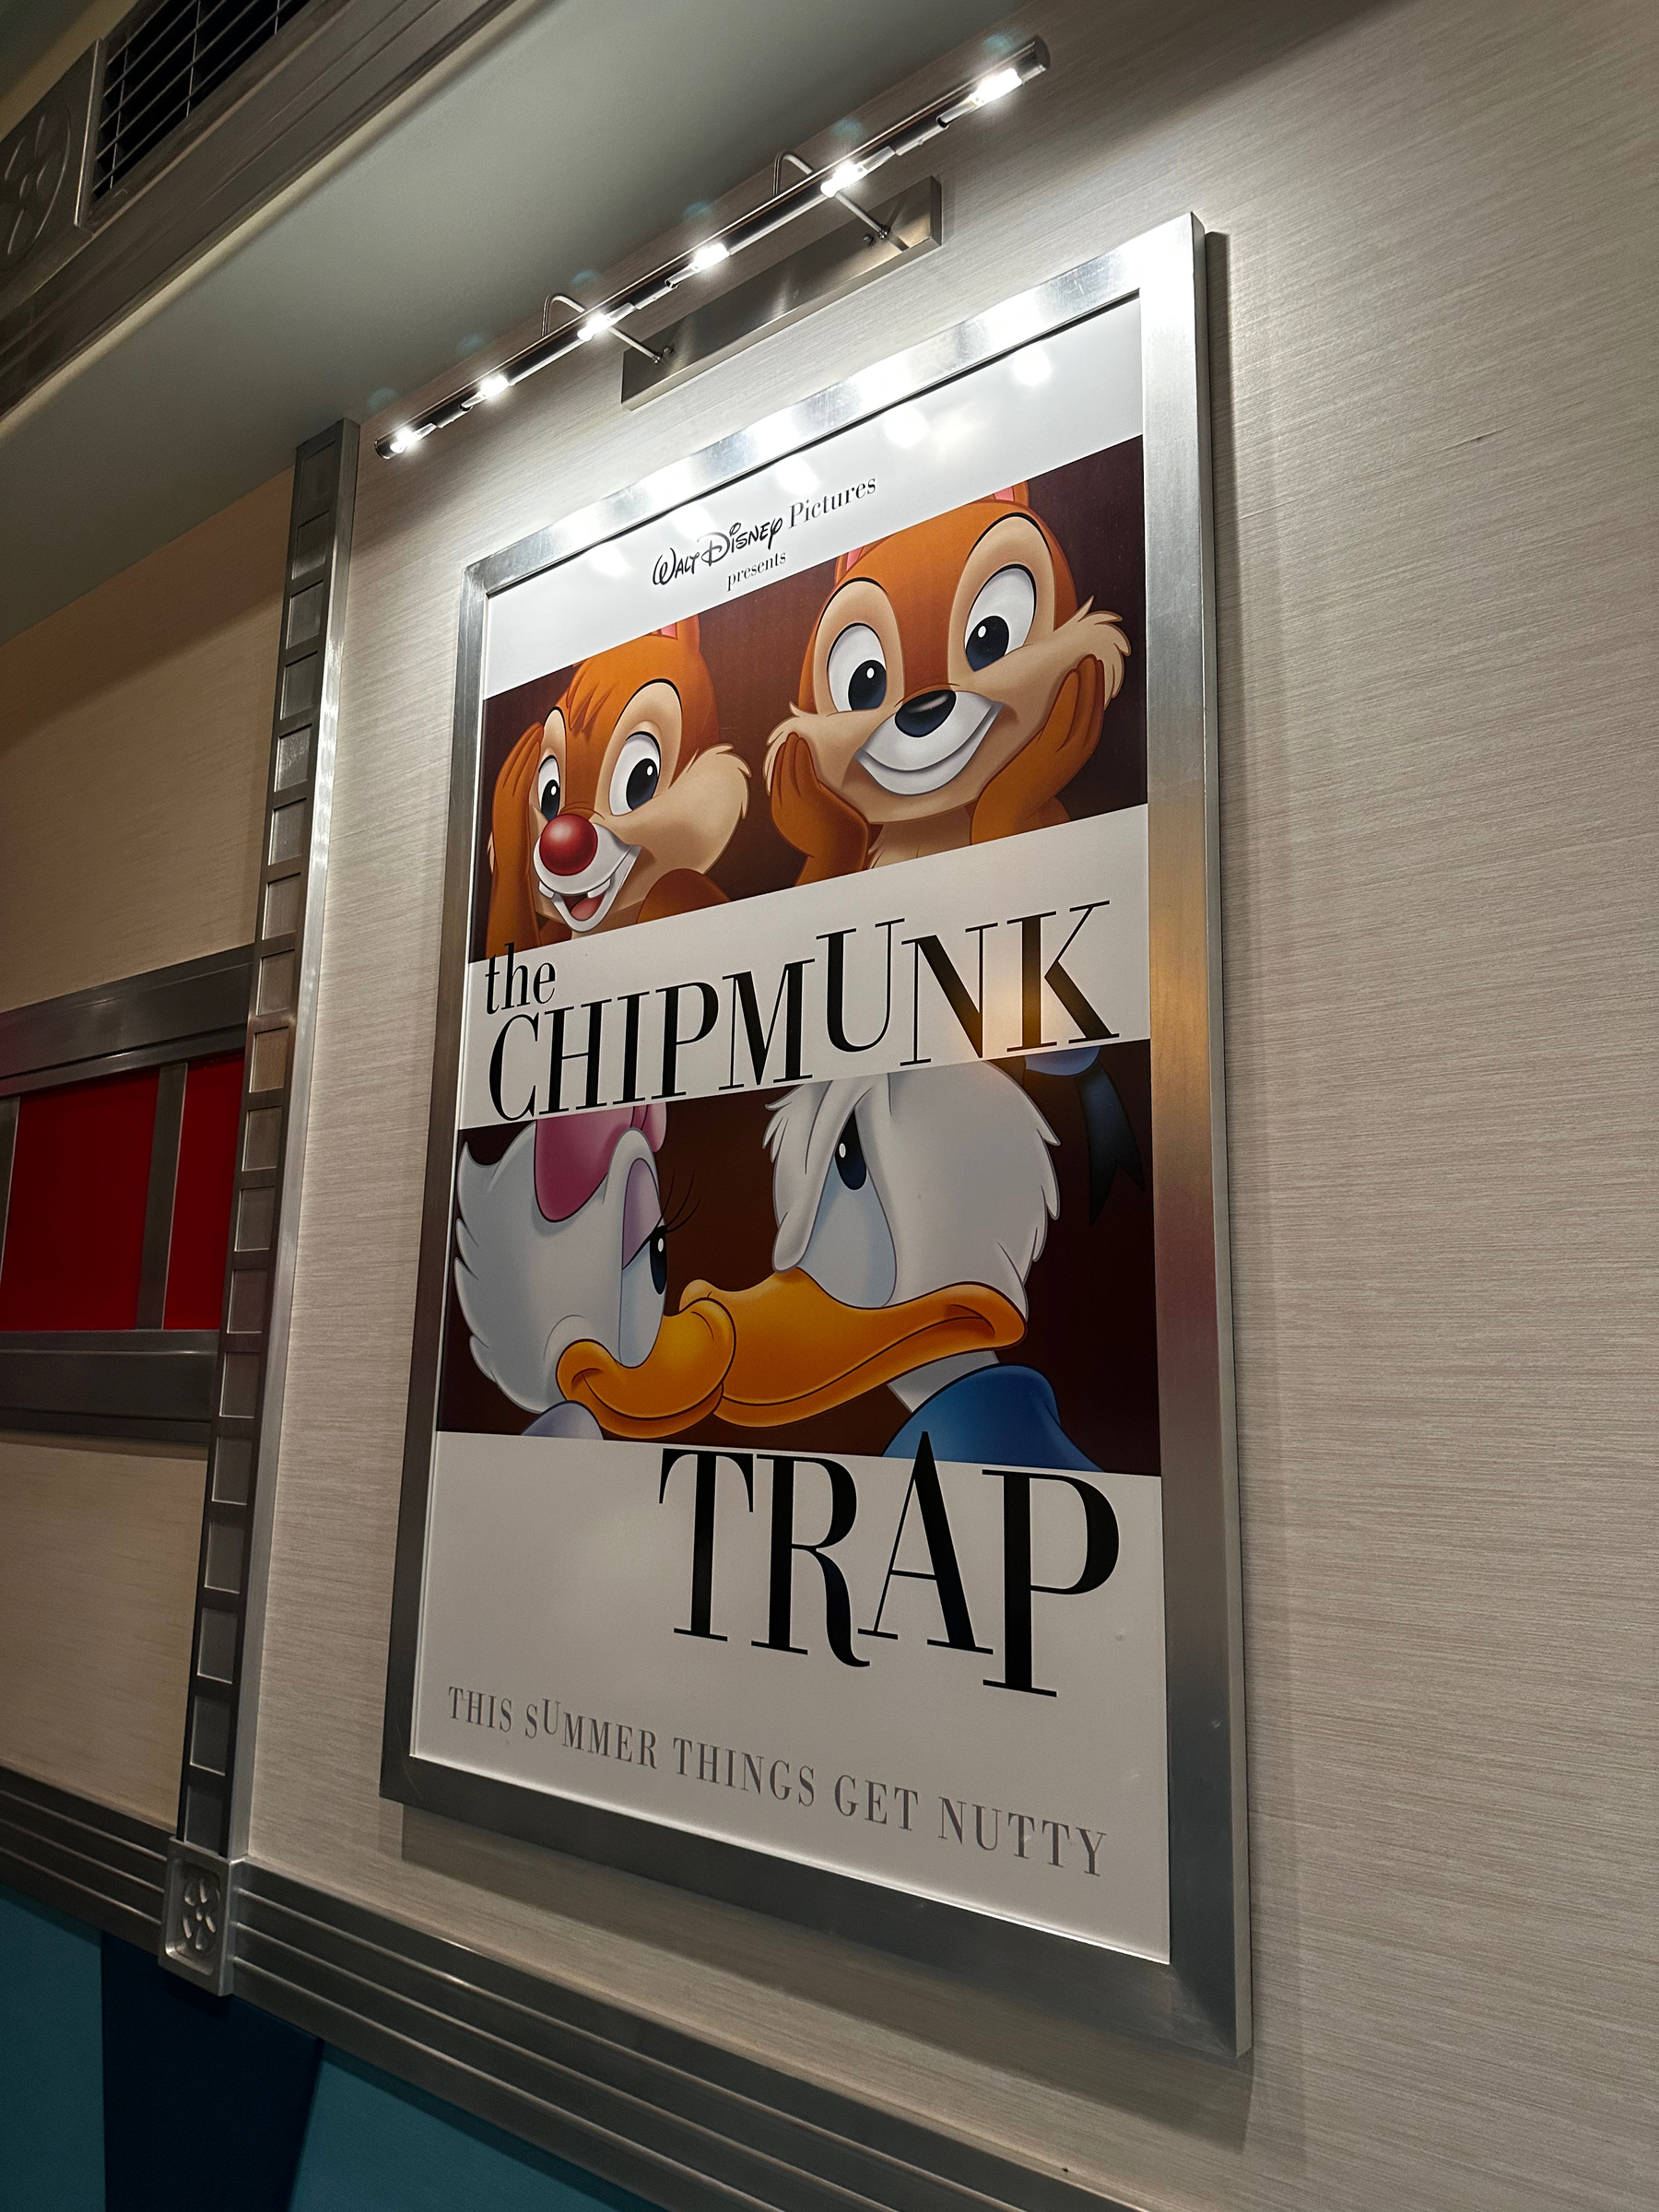 Movie poster for the speculative “The Chipmunk Trap” in a ride queue